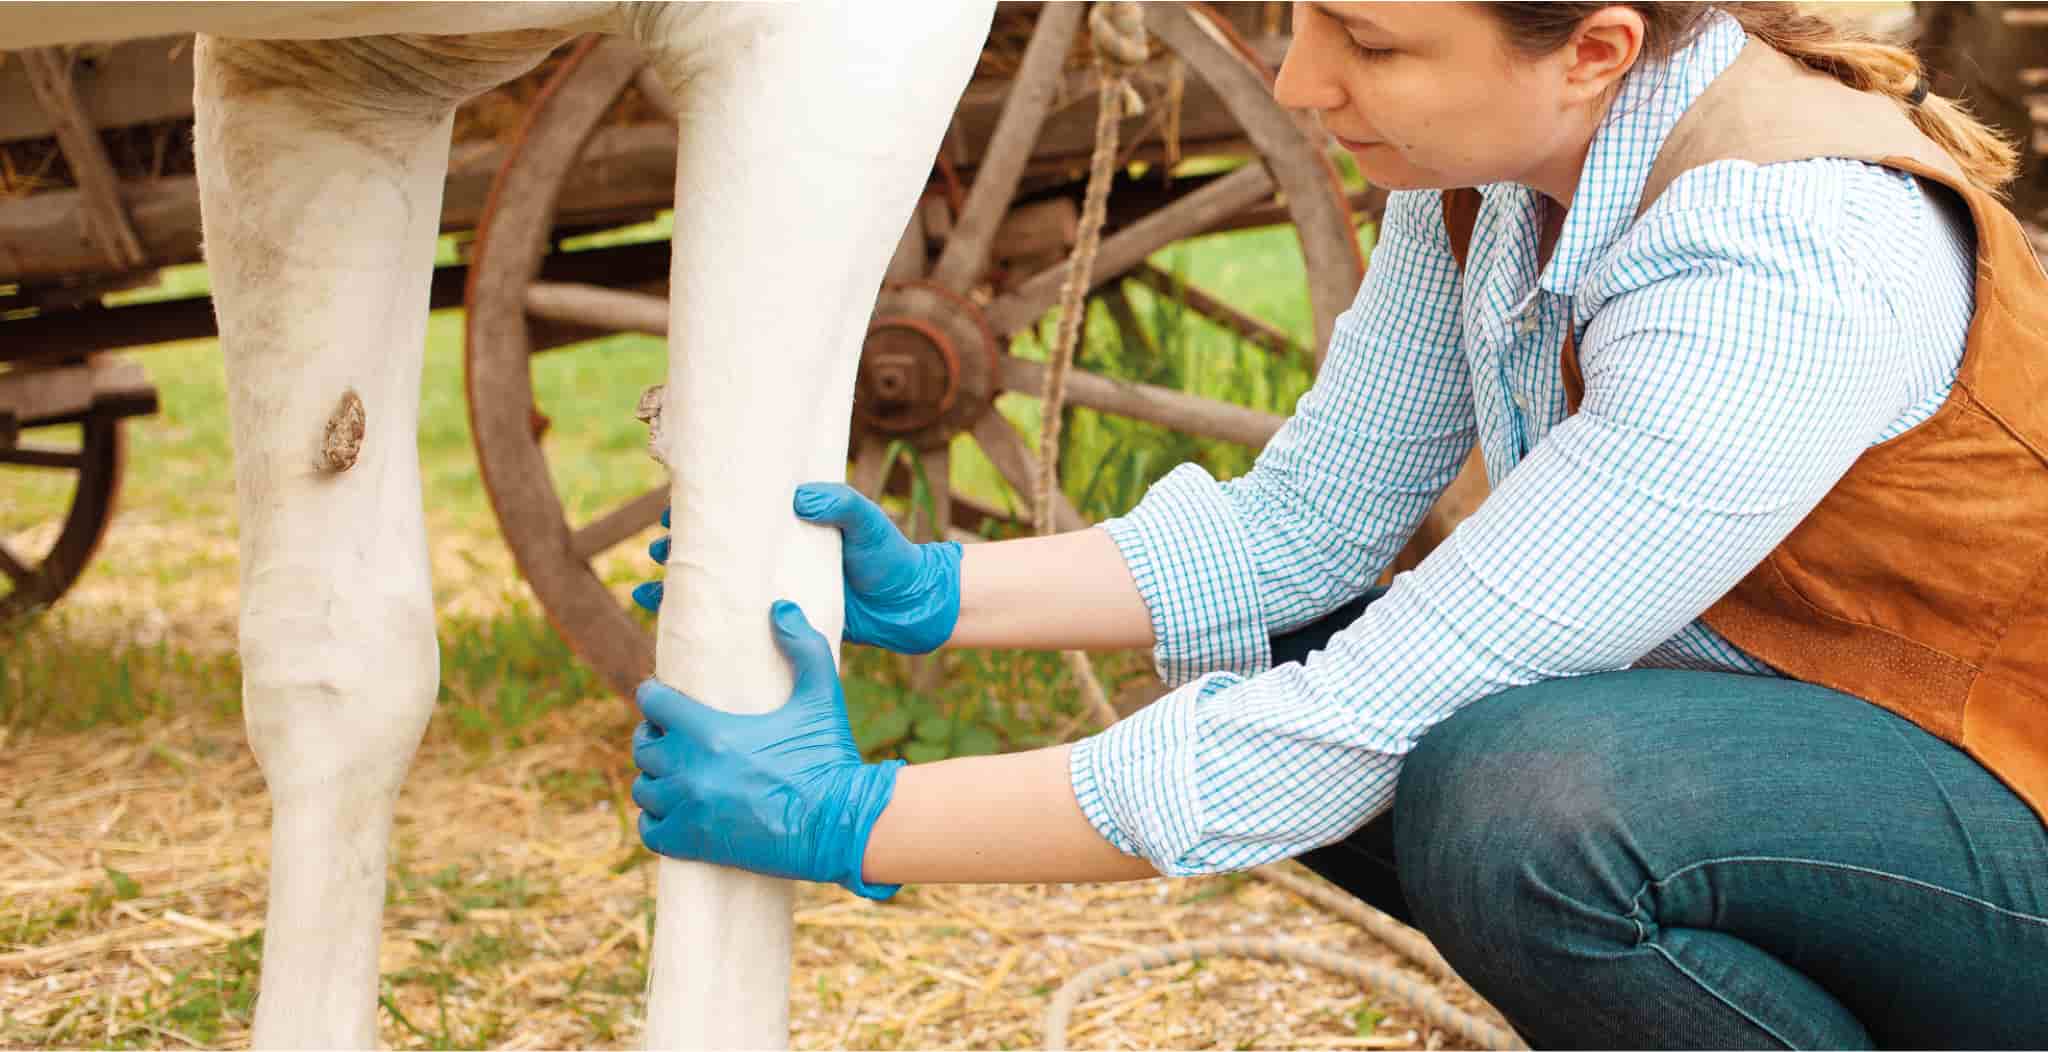 EQU streamz magnetic bands study on horses with inflammation issues in their legs women inspecting swollen leg